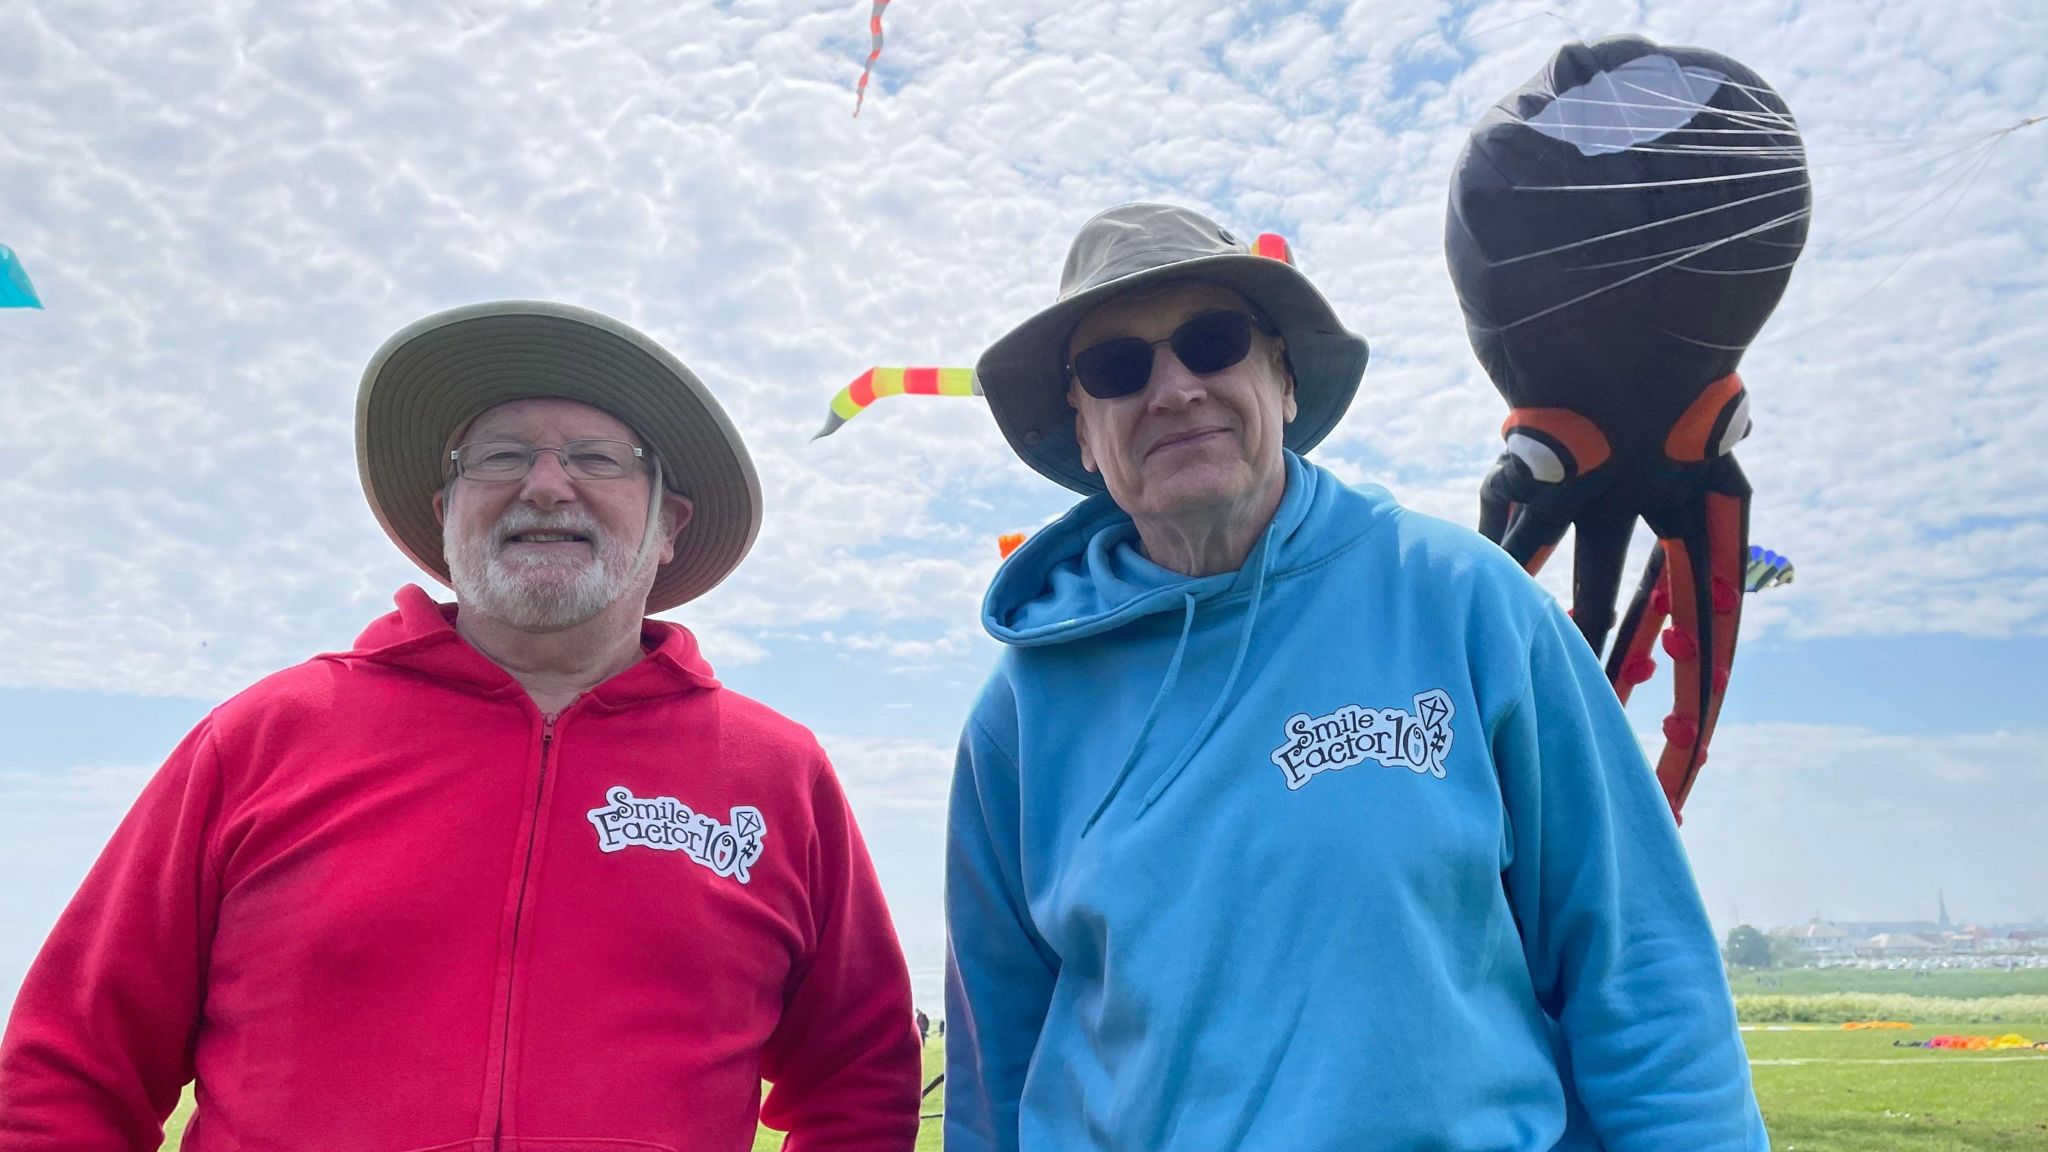 Ernie Williamson, left, and John Elvin at the Bridlington kite festival with kites in the sky behind them